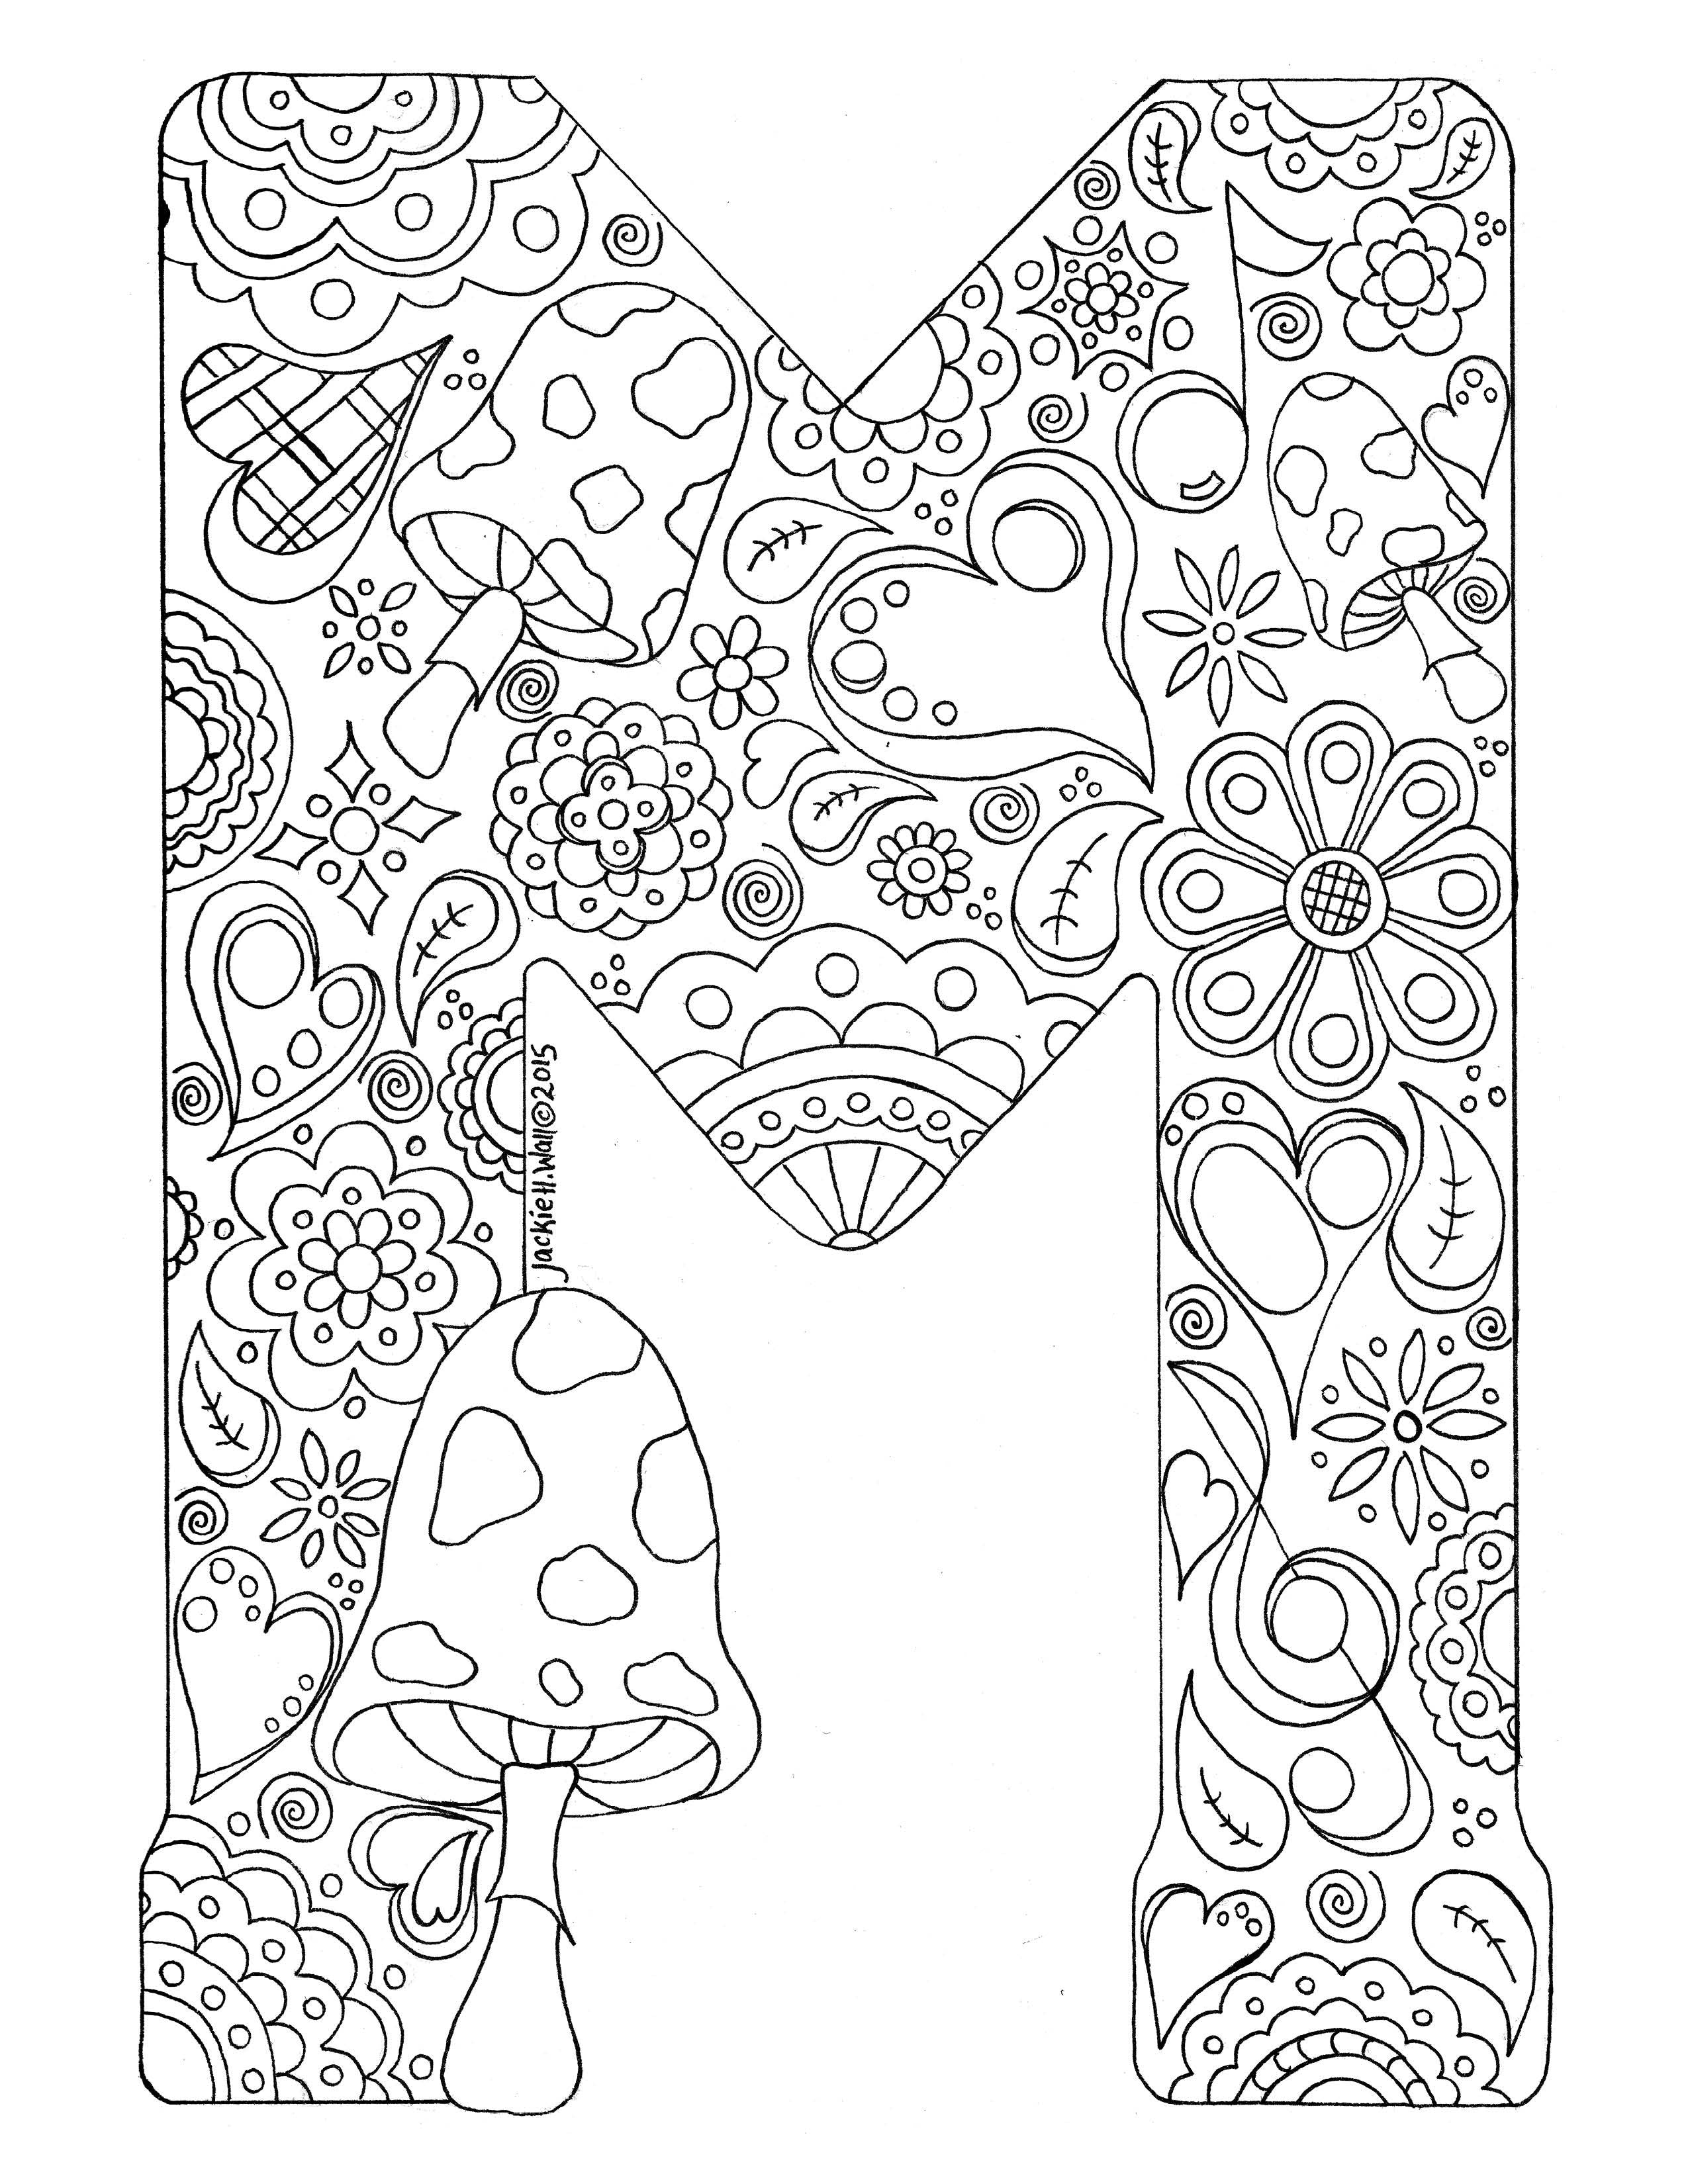 letter-m-colouring-page-jackie-wall-studio